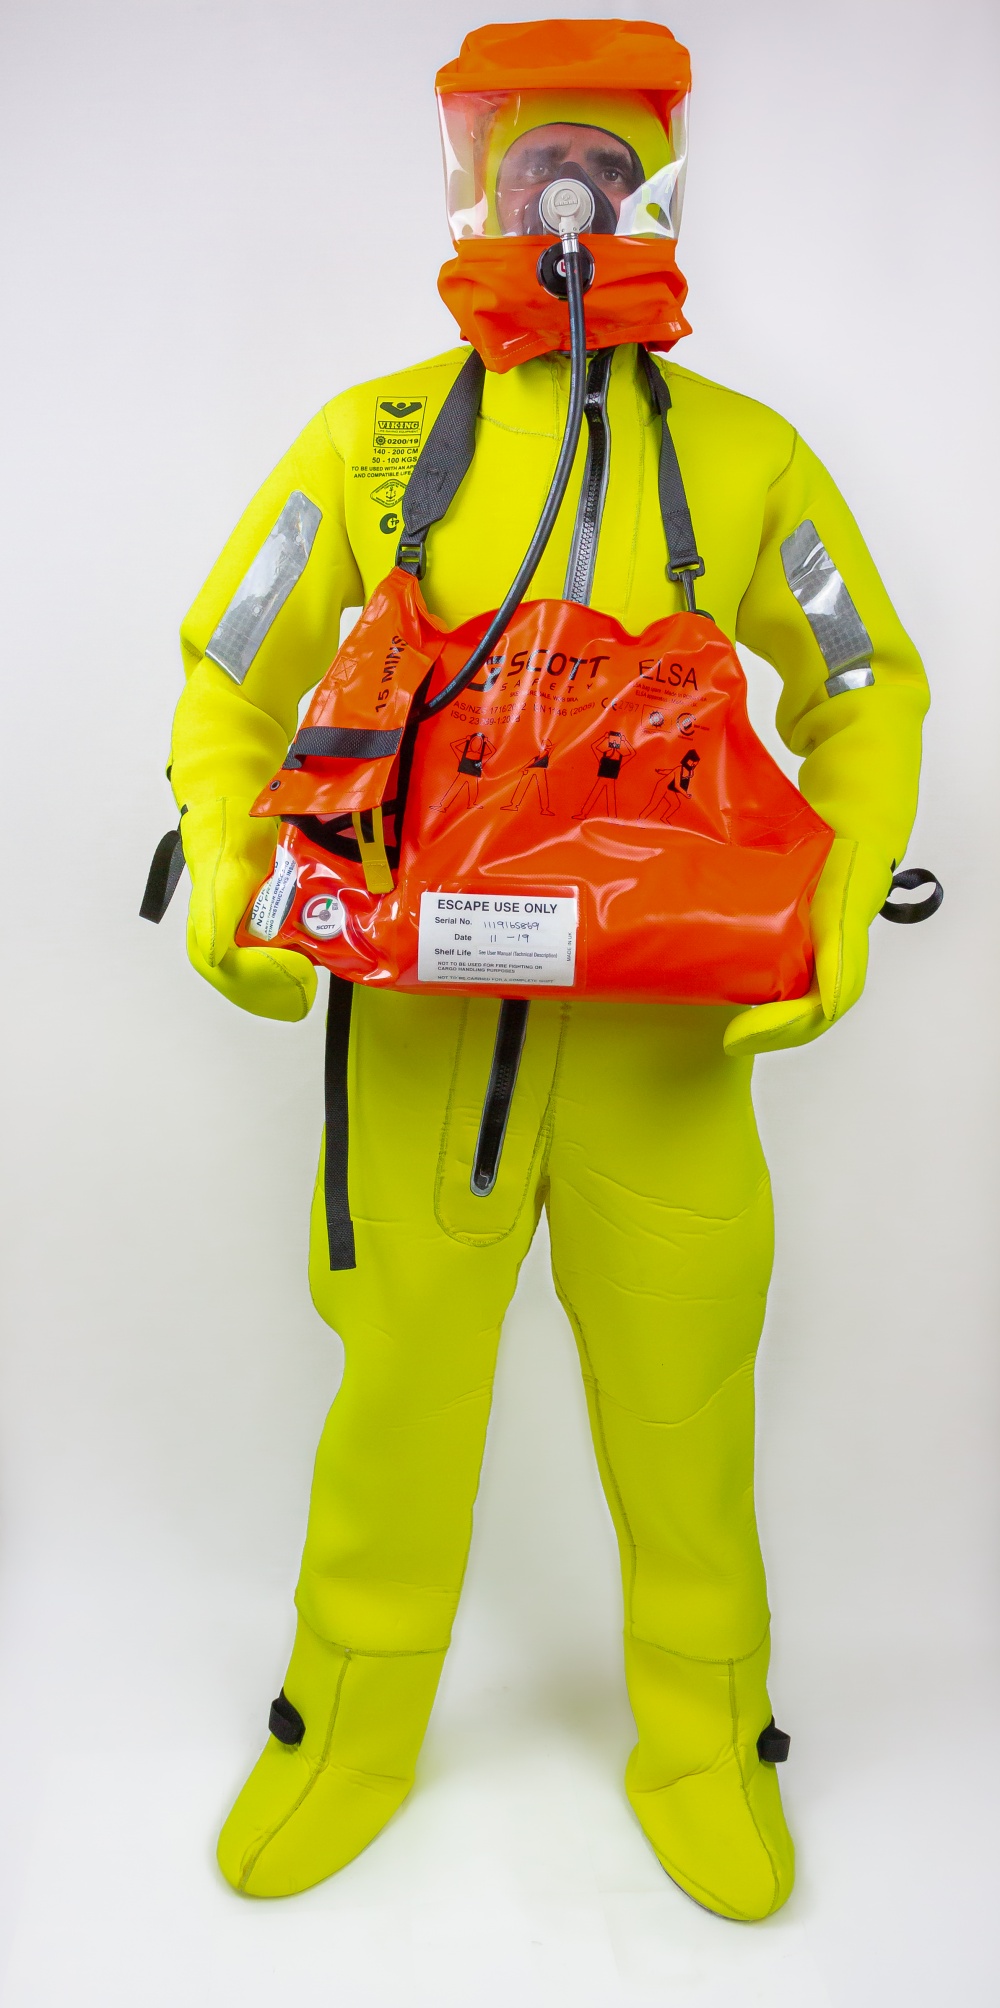 Maintanance and check of EEBD’s (Emergency Escape Breathing Devices) - 1